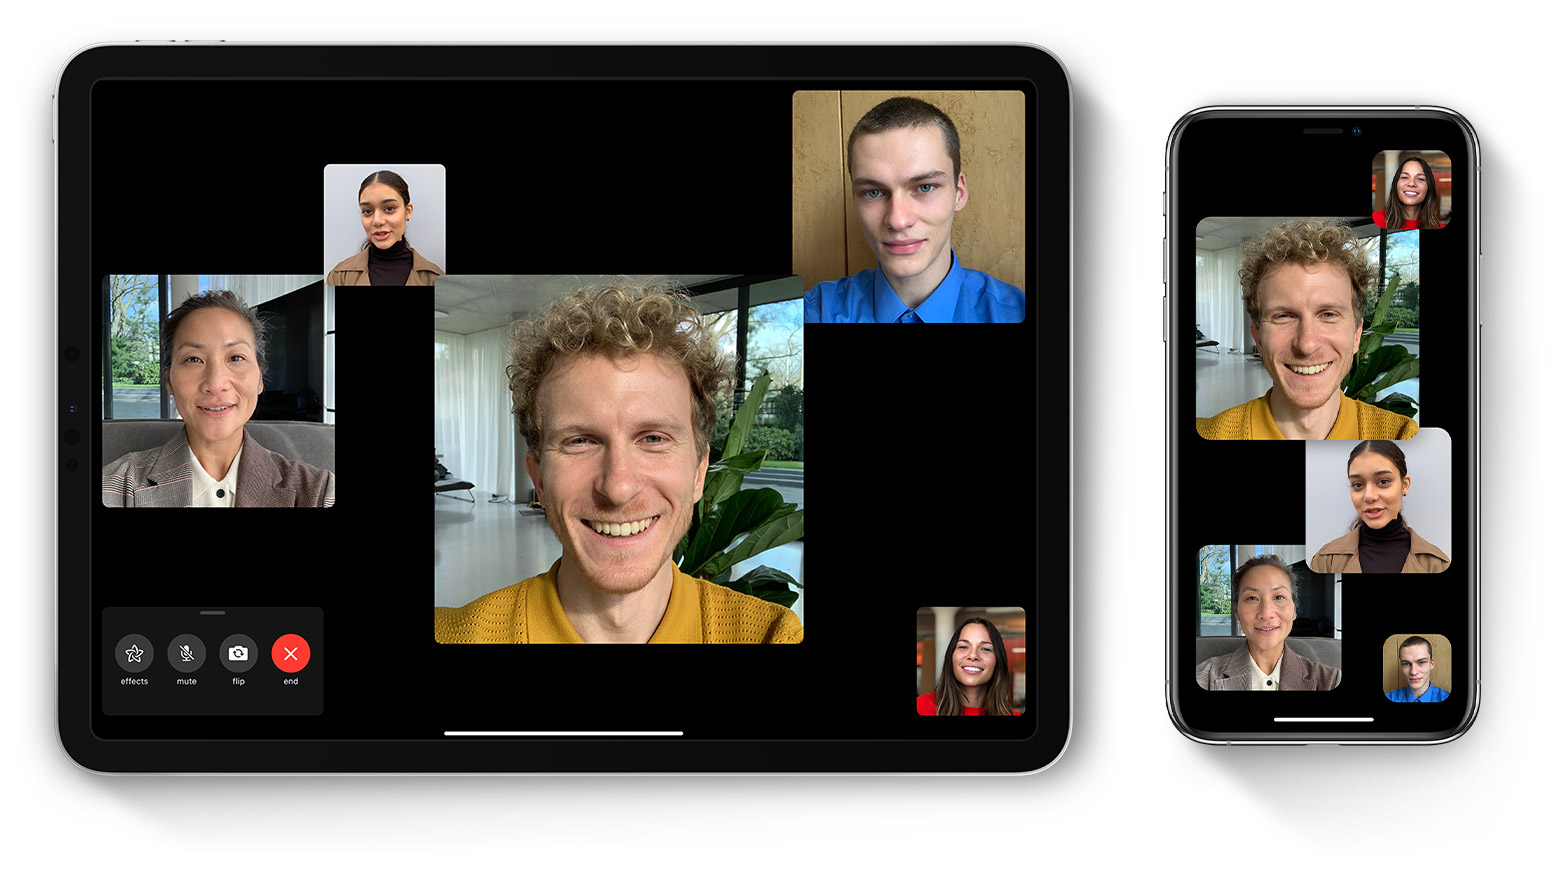 Group FaceTime call on iPad and iPhone.